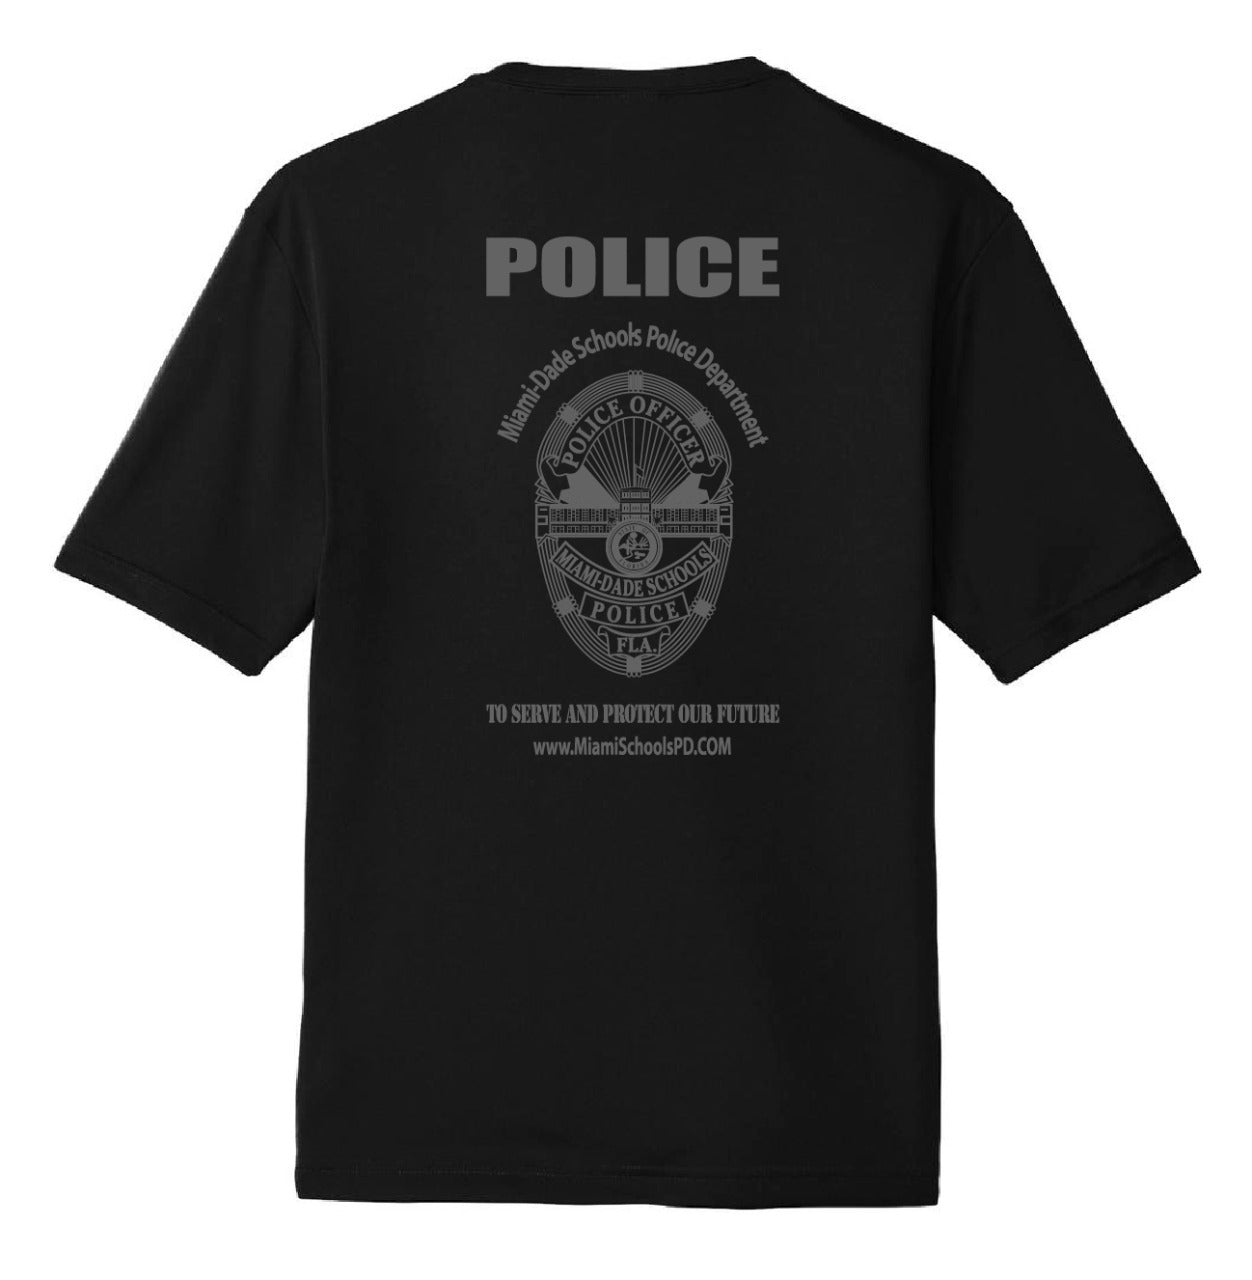 Miami Dade Schools Police Department Cooling Performance Shortsleeve Tee